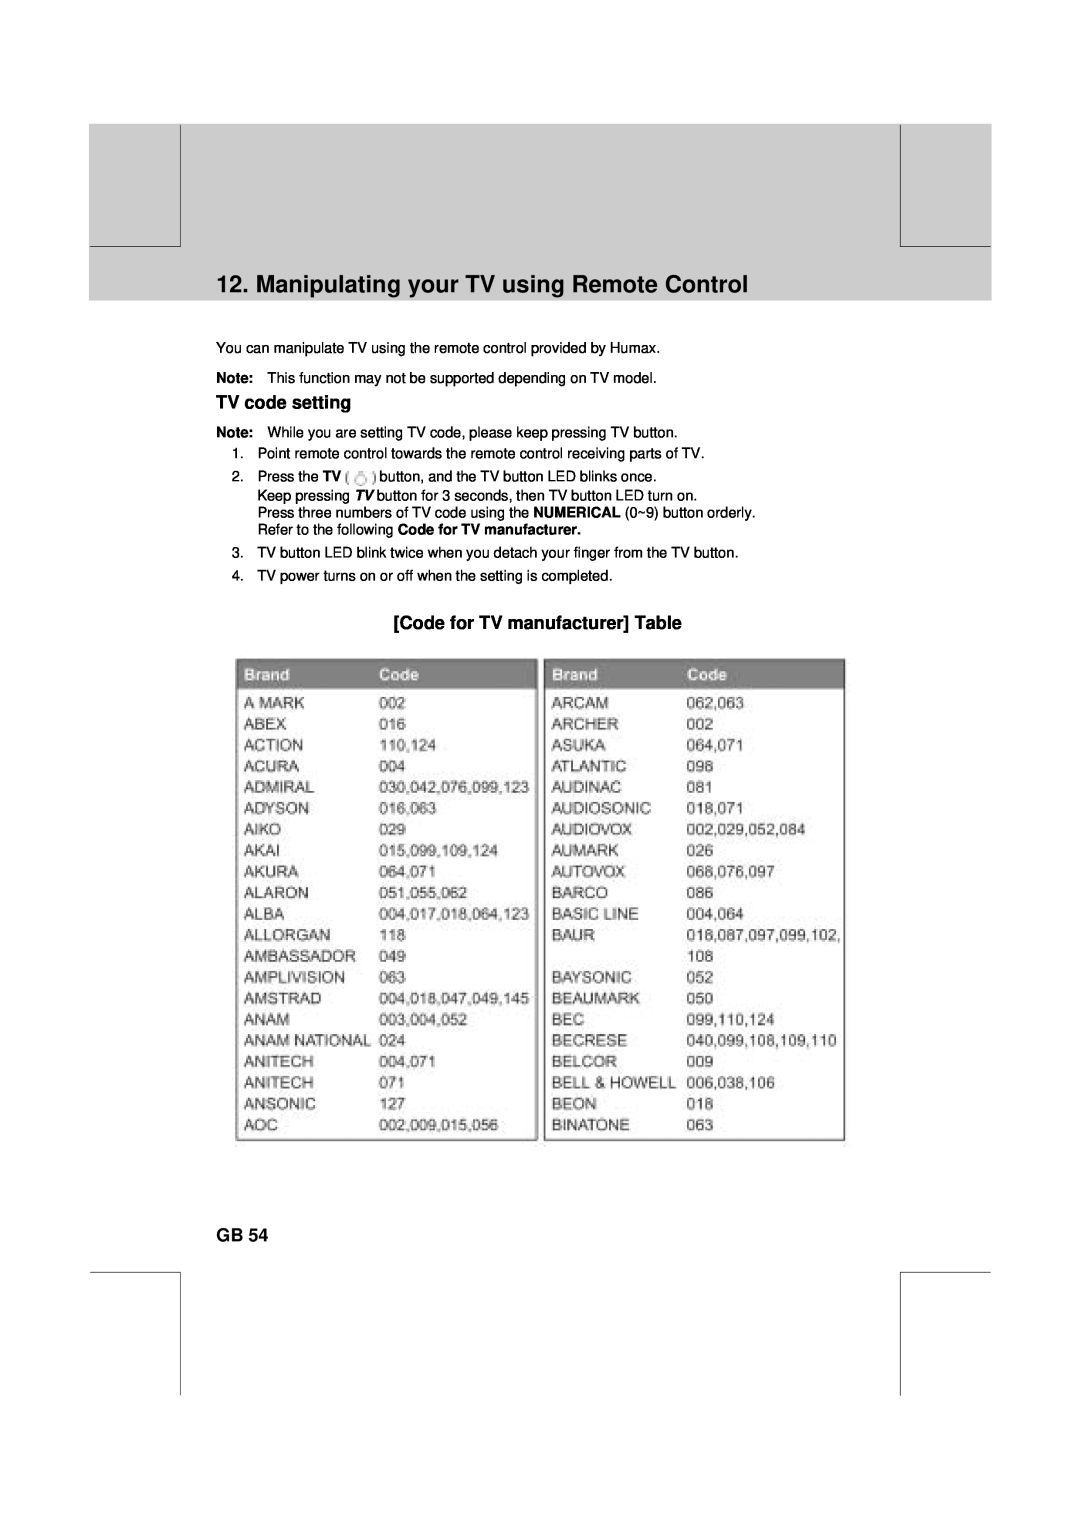 Humax VA-FOX T manual Manipulating your TV using Remote Control, TV code setting, Code for TV manufacturer Table GB 